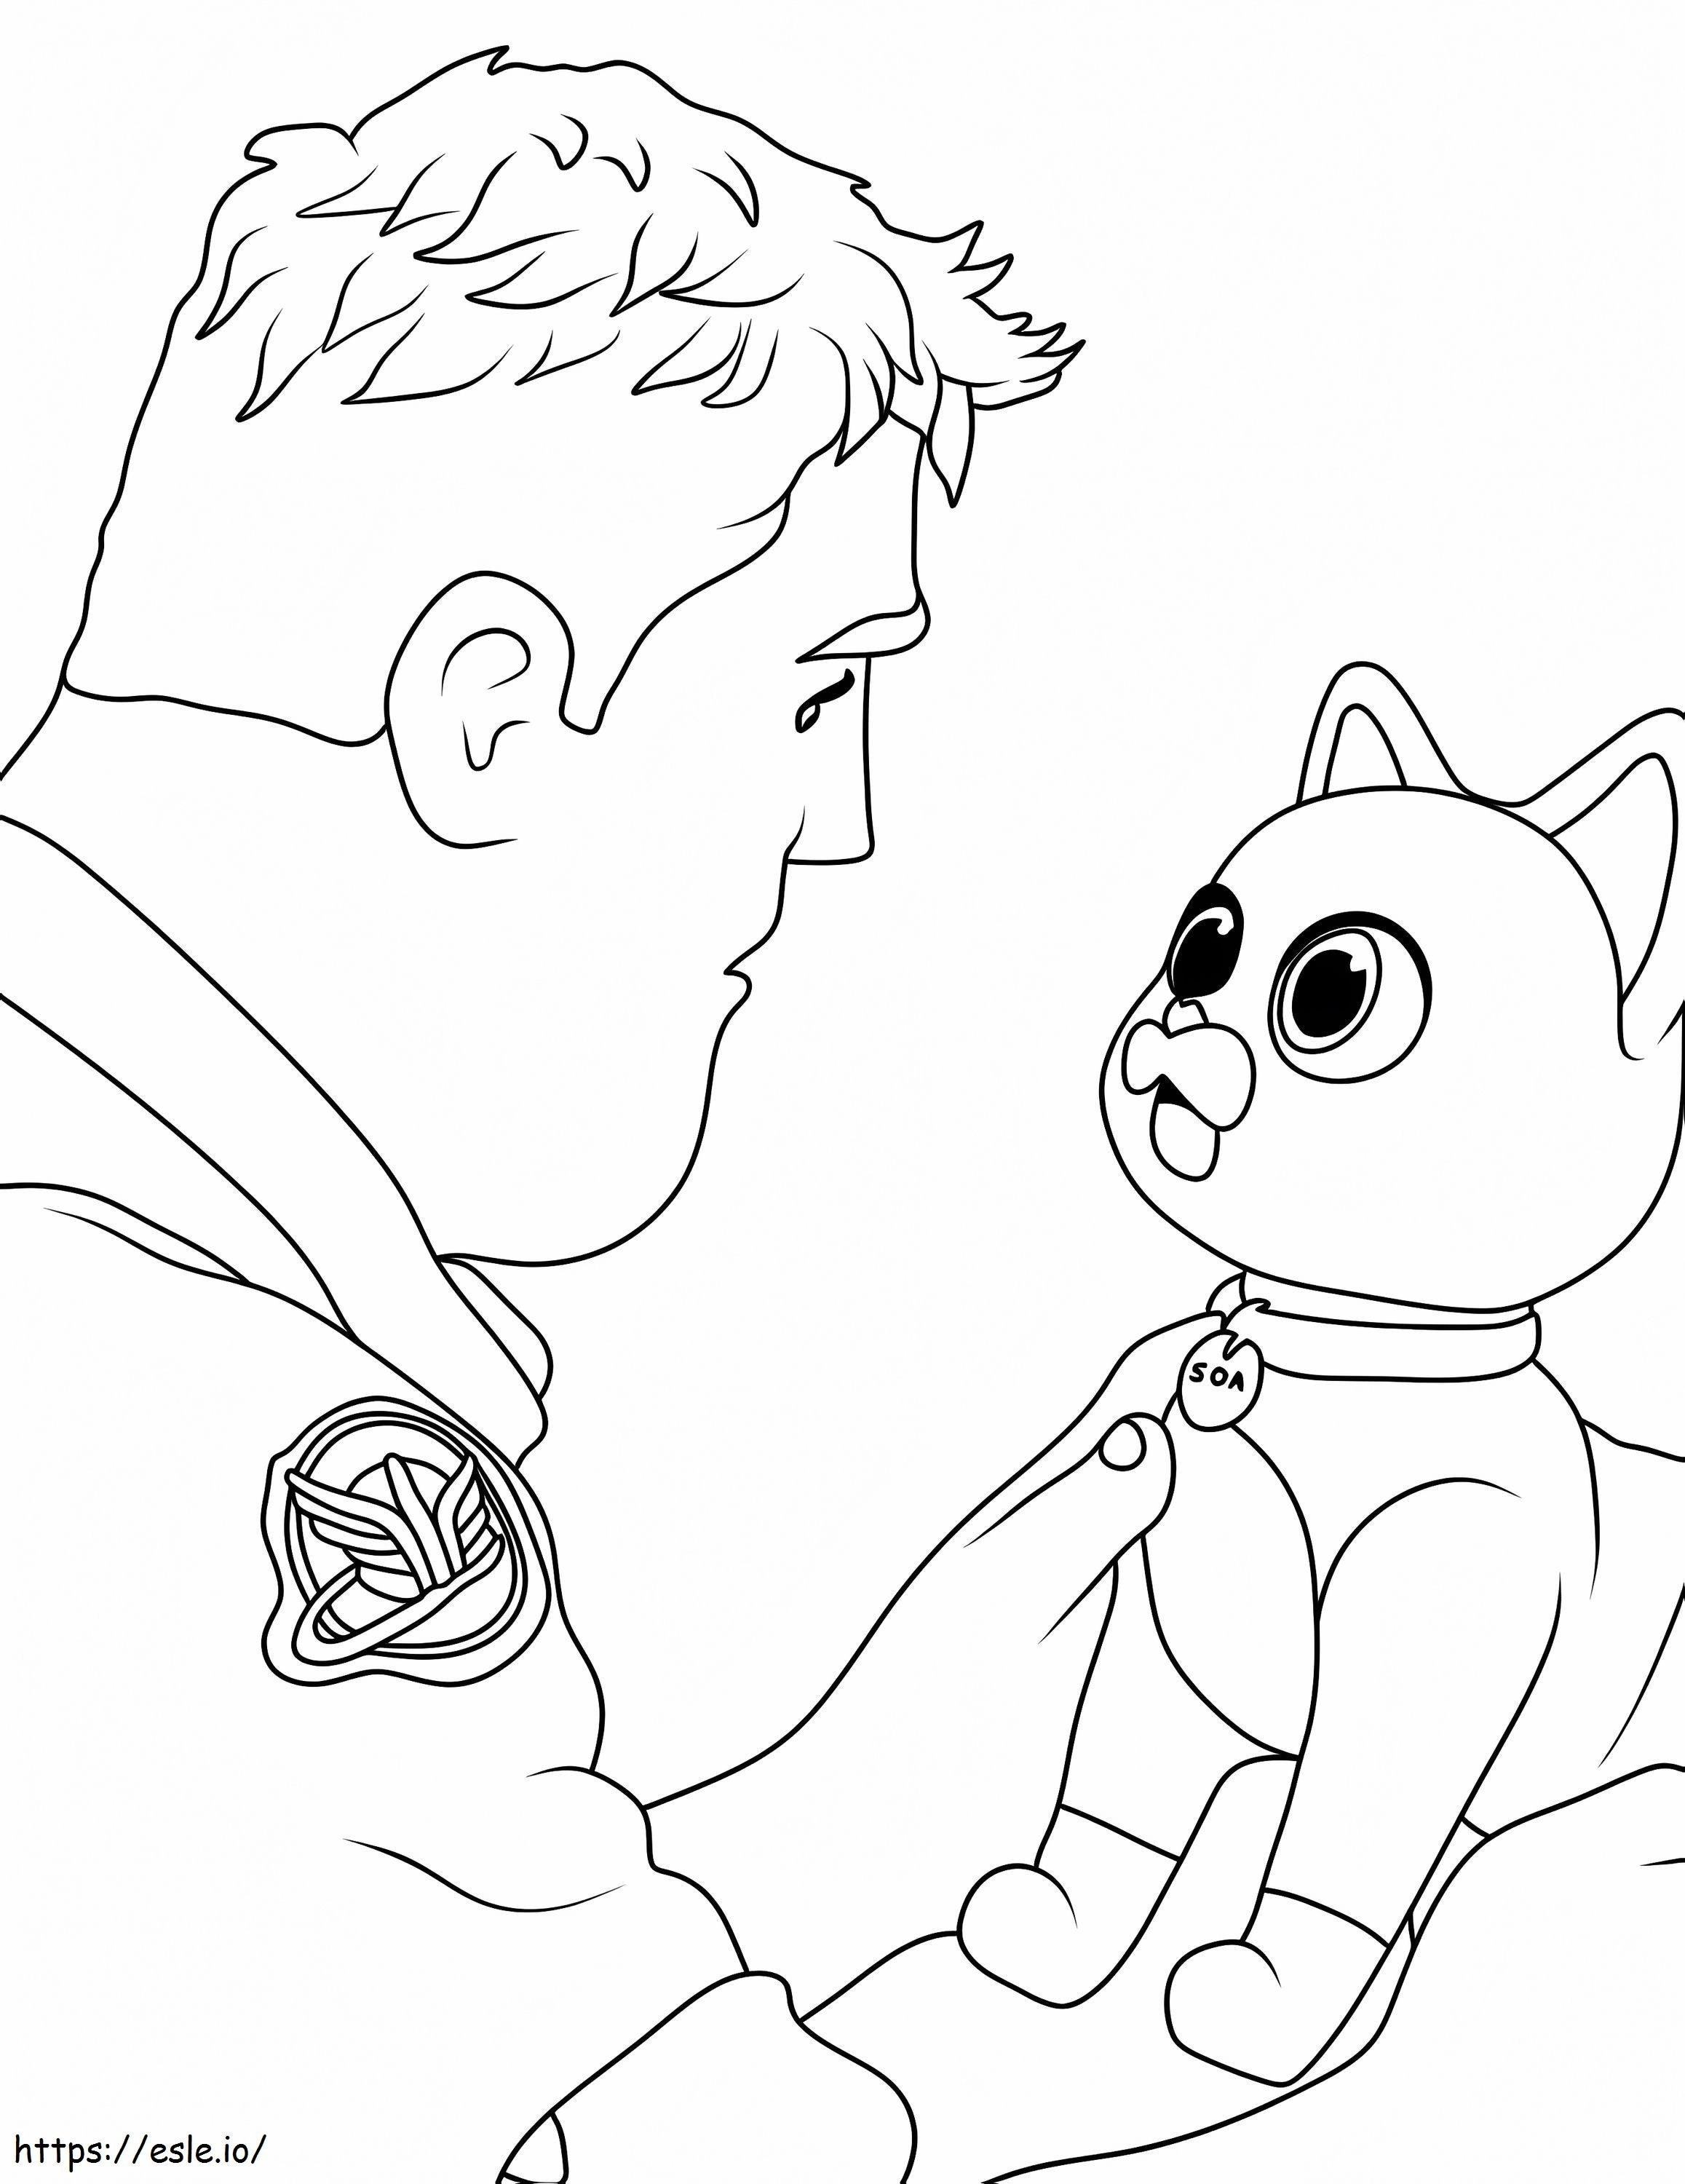 Buzz Lightyear And Sox coloring page